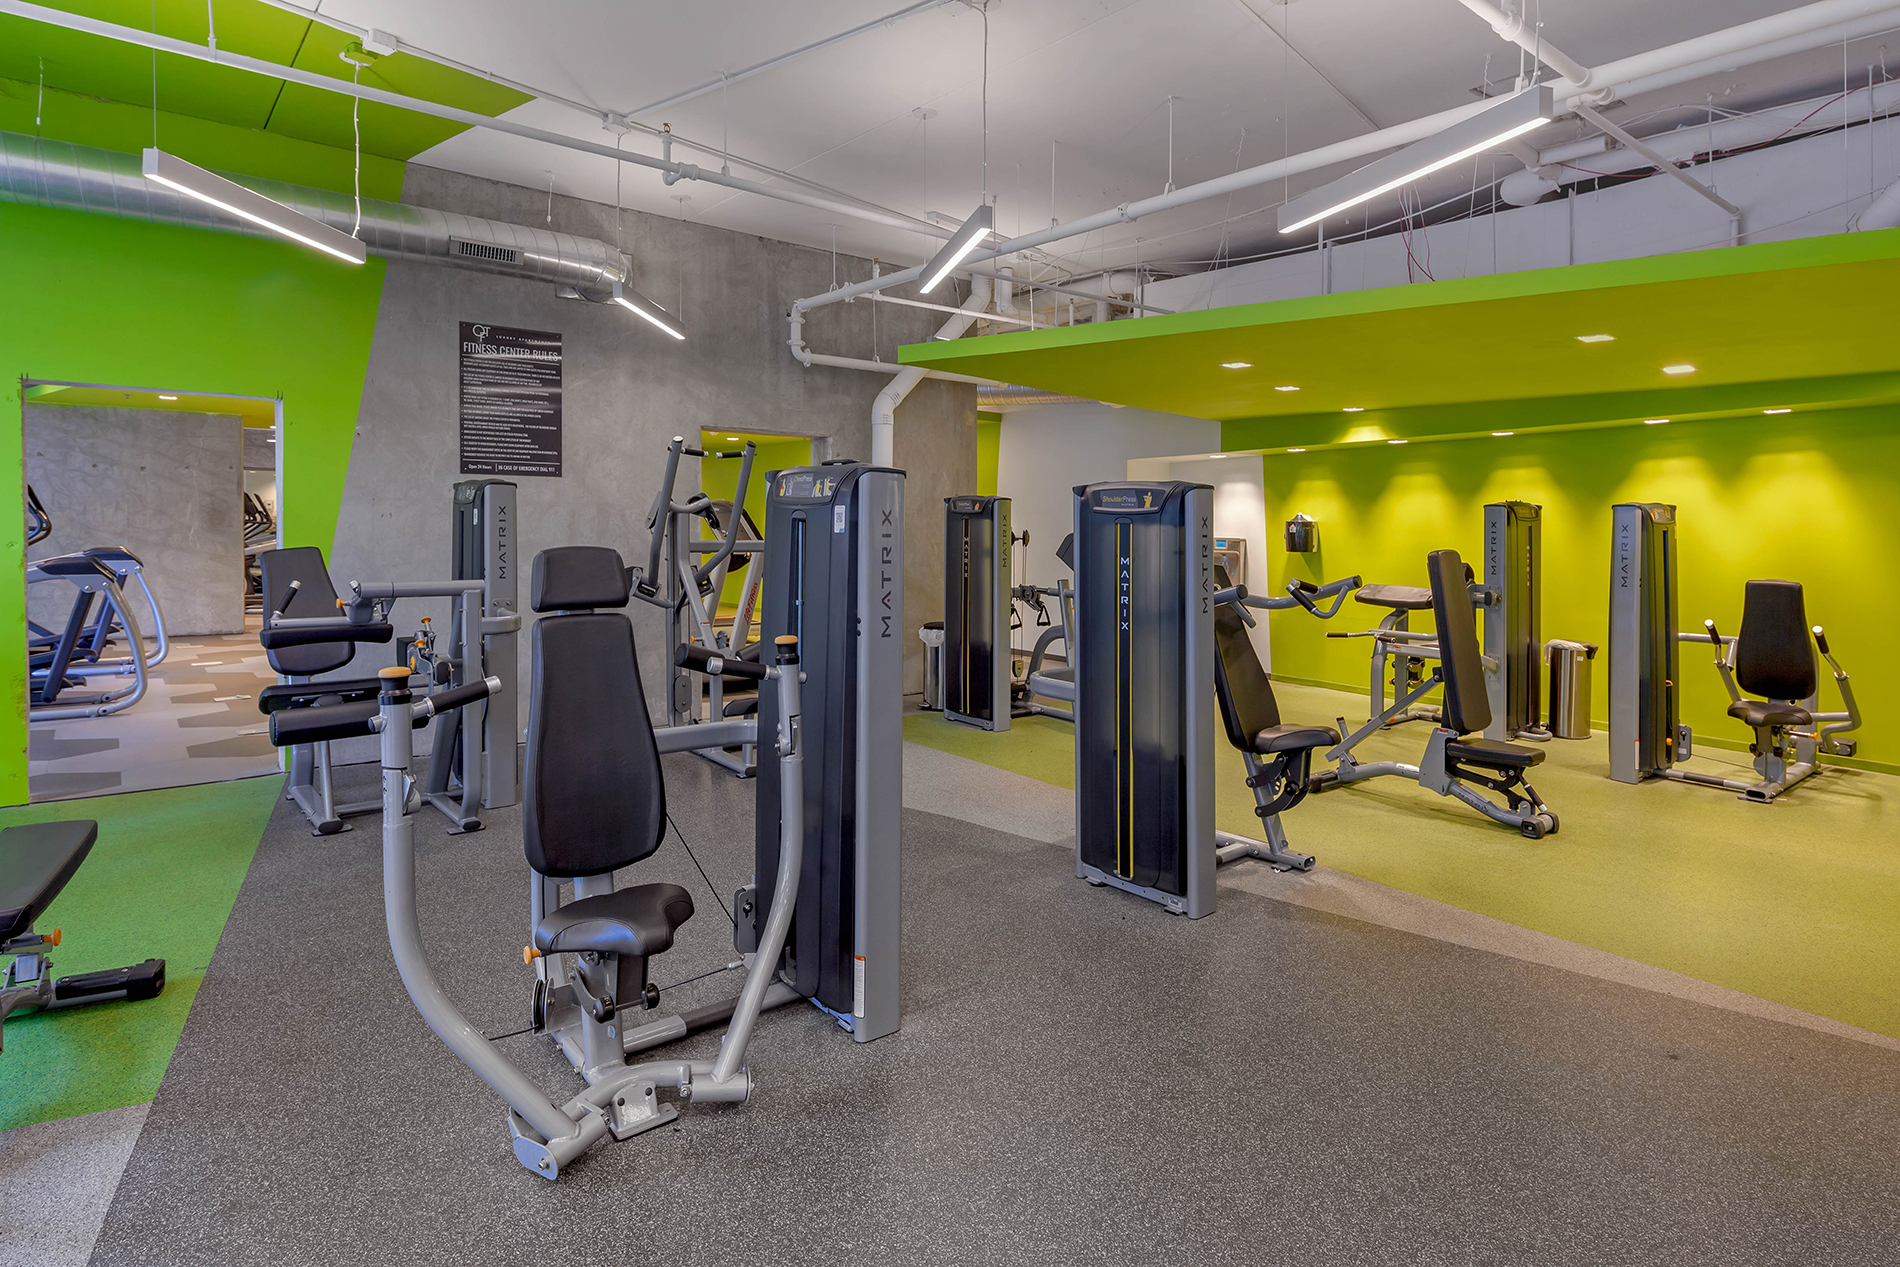 Fitness center at an apartment building